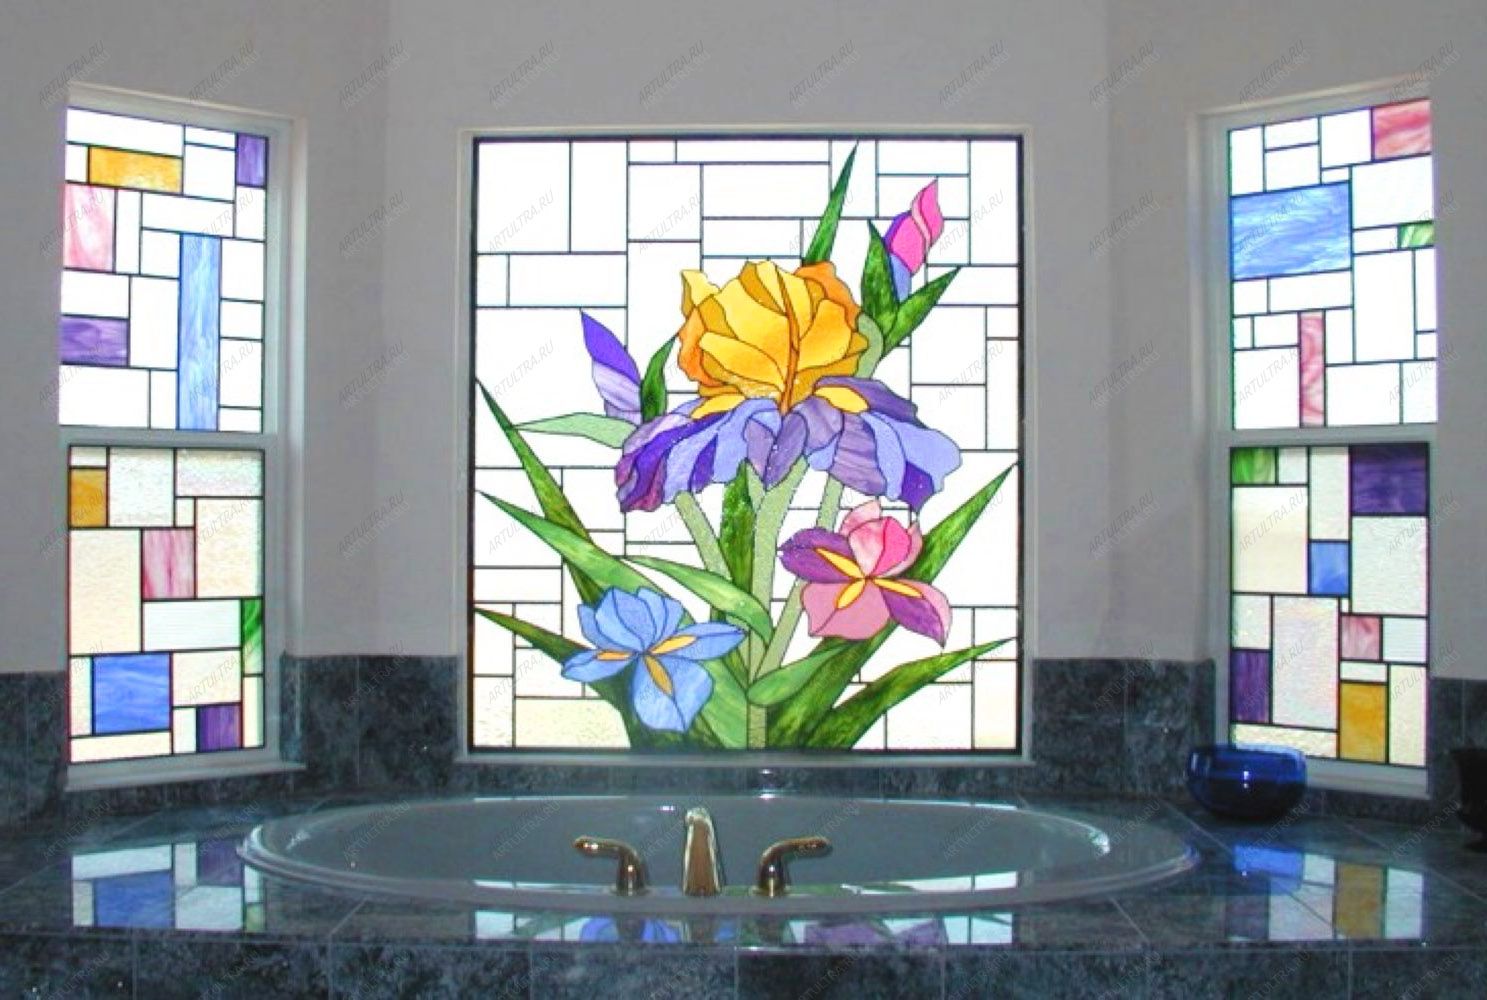 Stained glass window in the bathroom